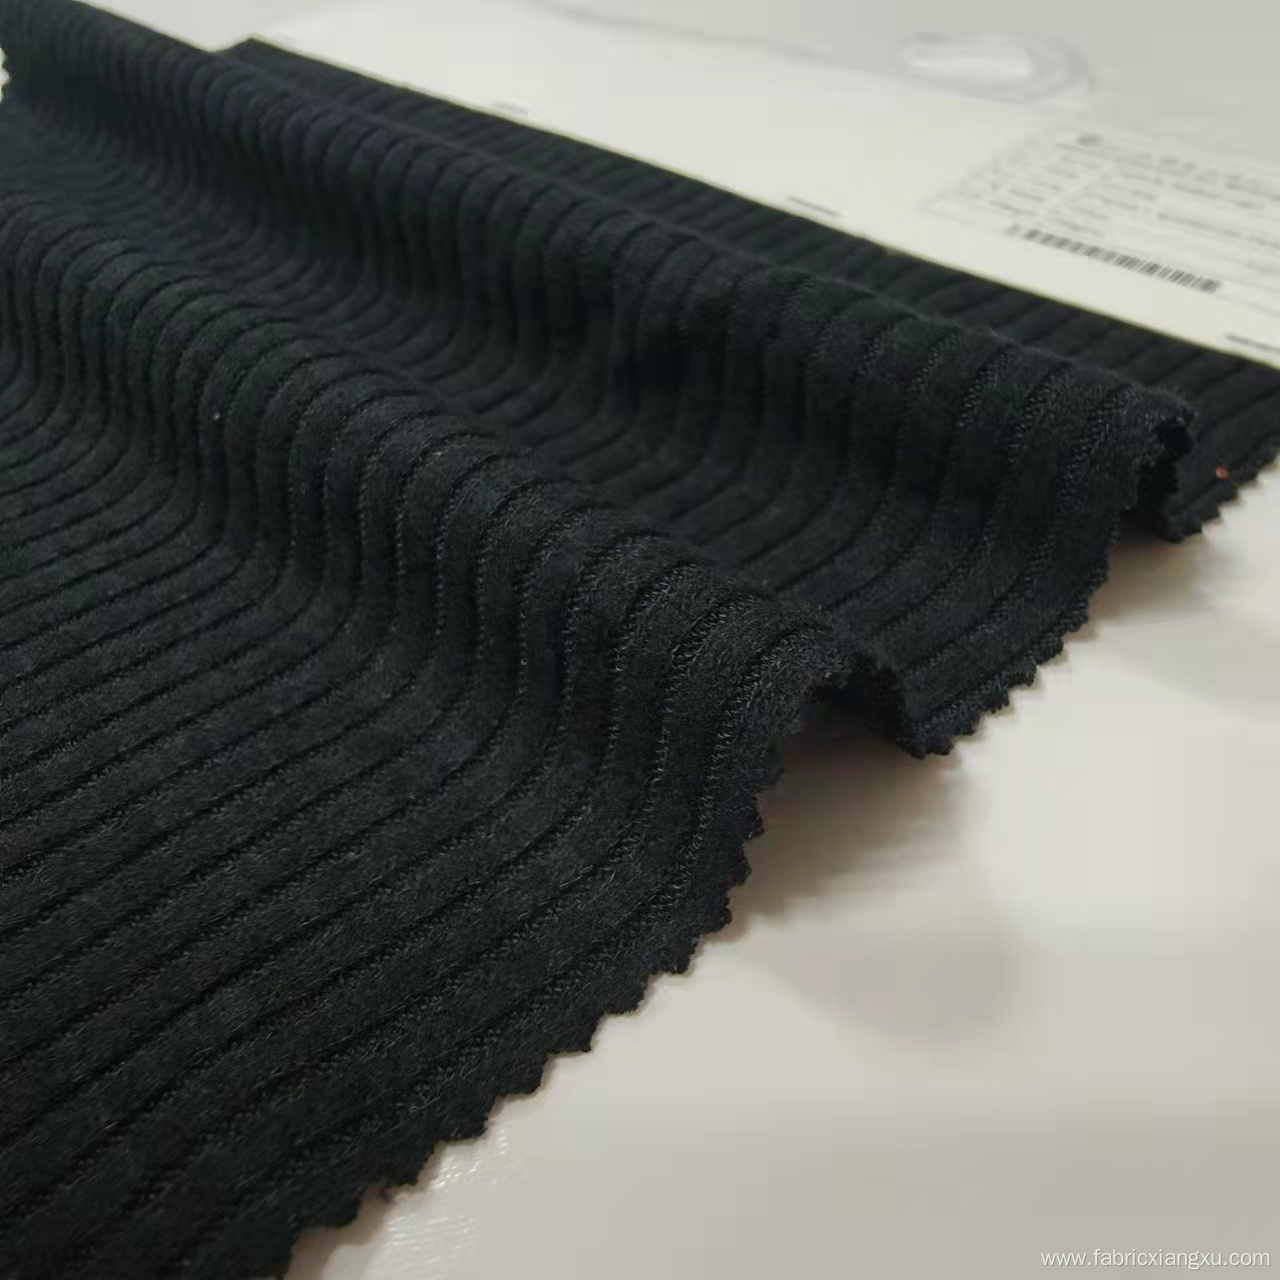 rib rayon polyester knit fabric for sweater